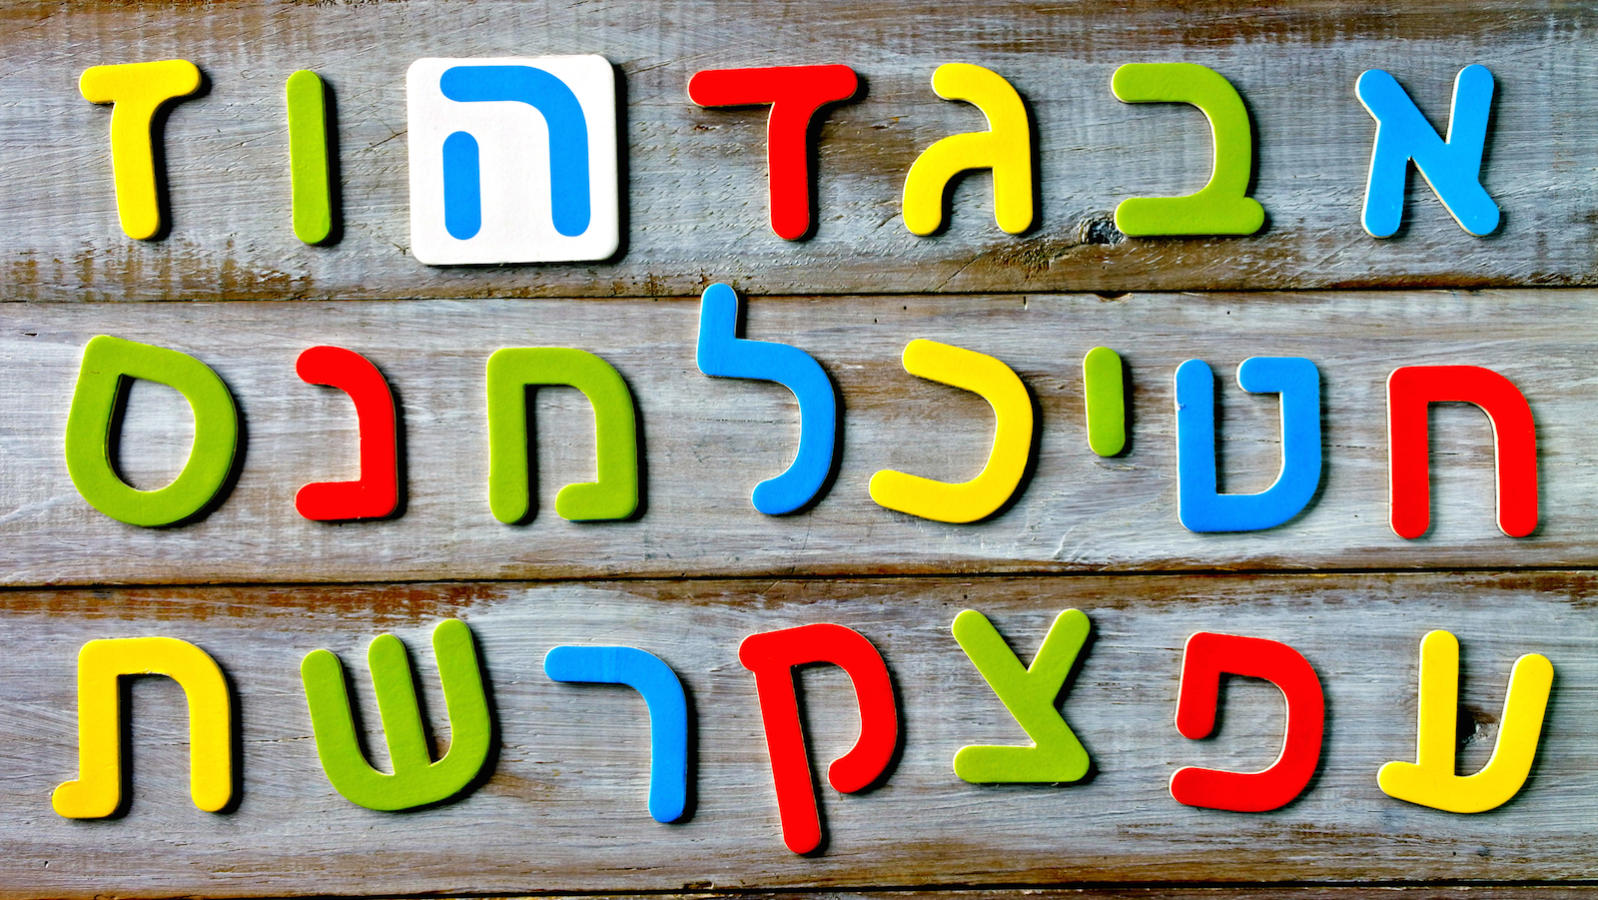 How to Learn Hebrew in Class With the Dream Team